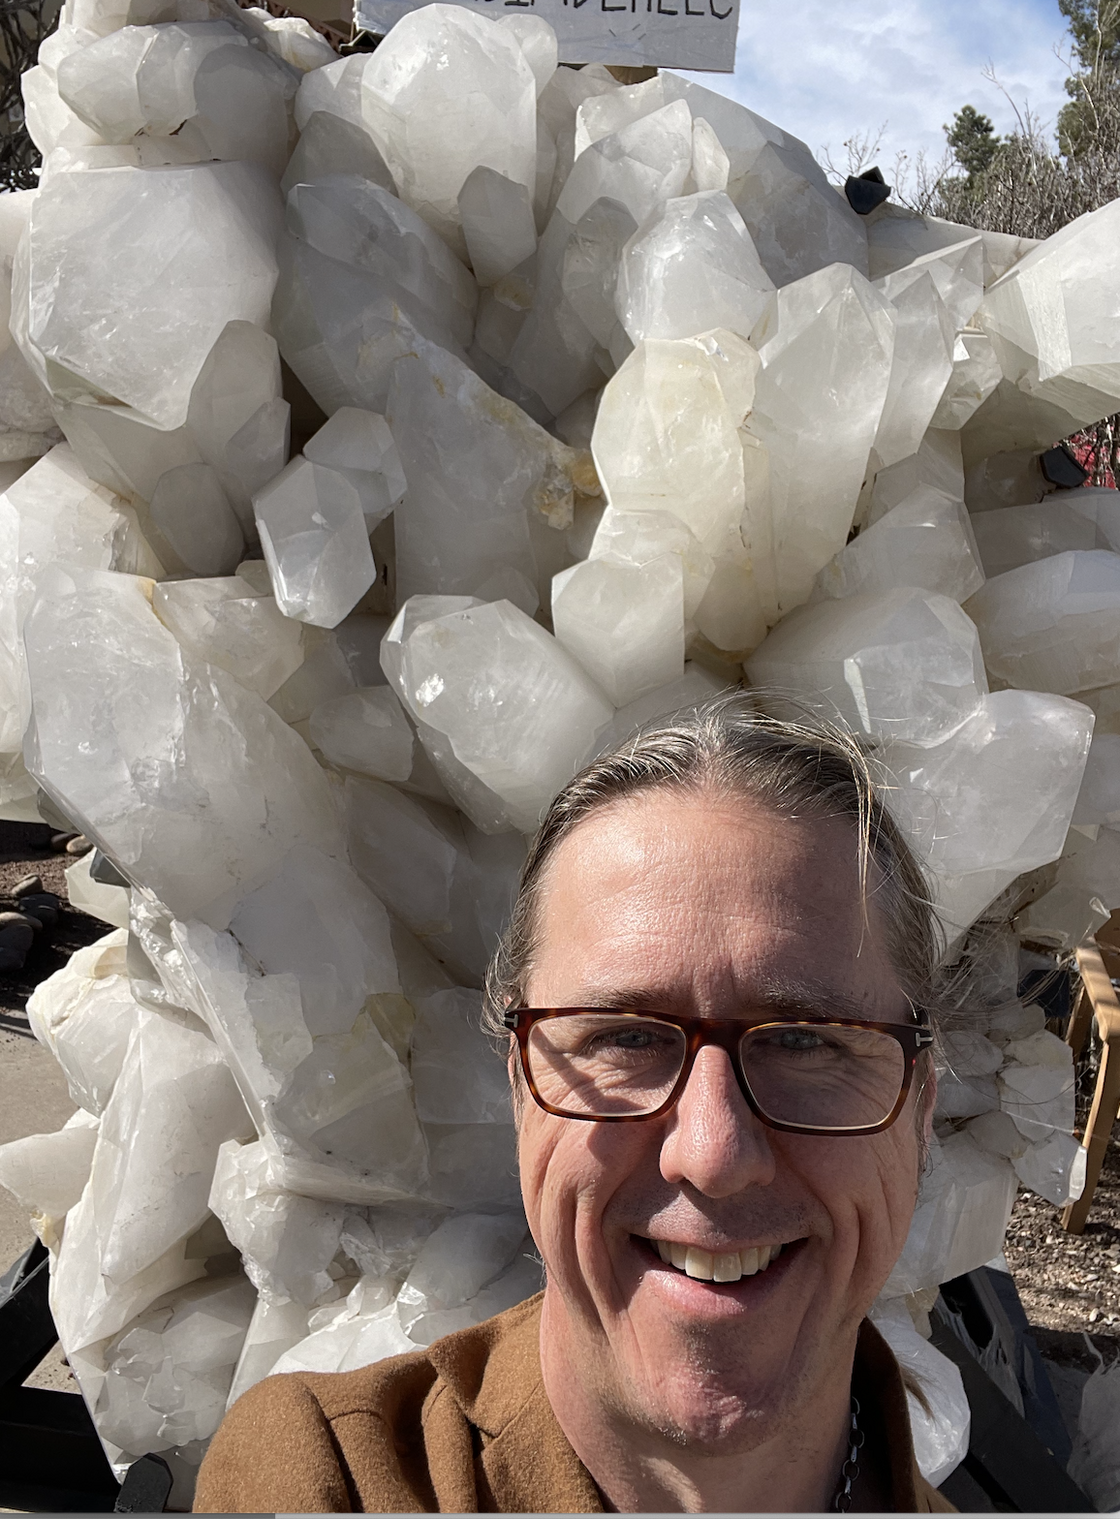 Chris with an exceptionally large quartz cluster in Tucson